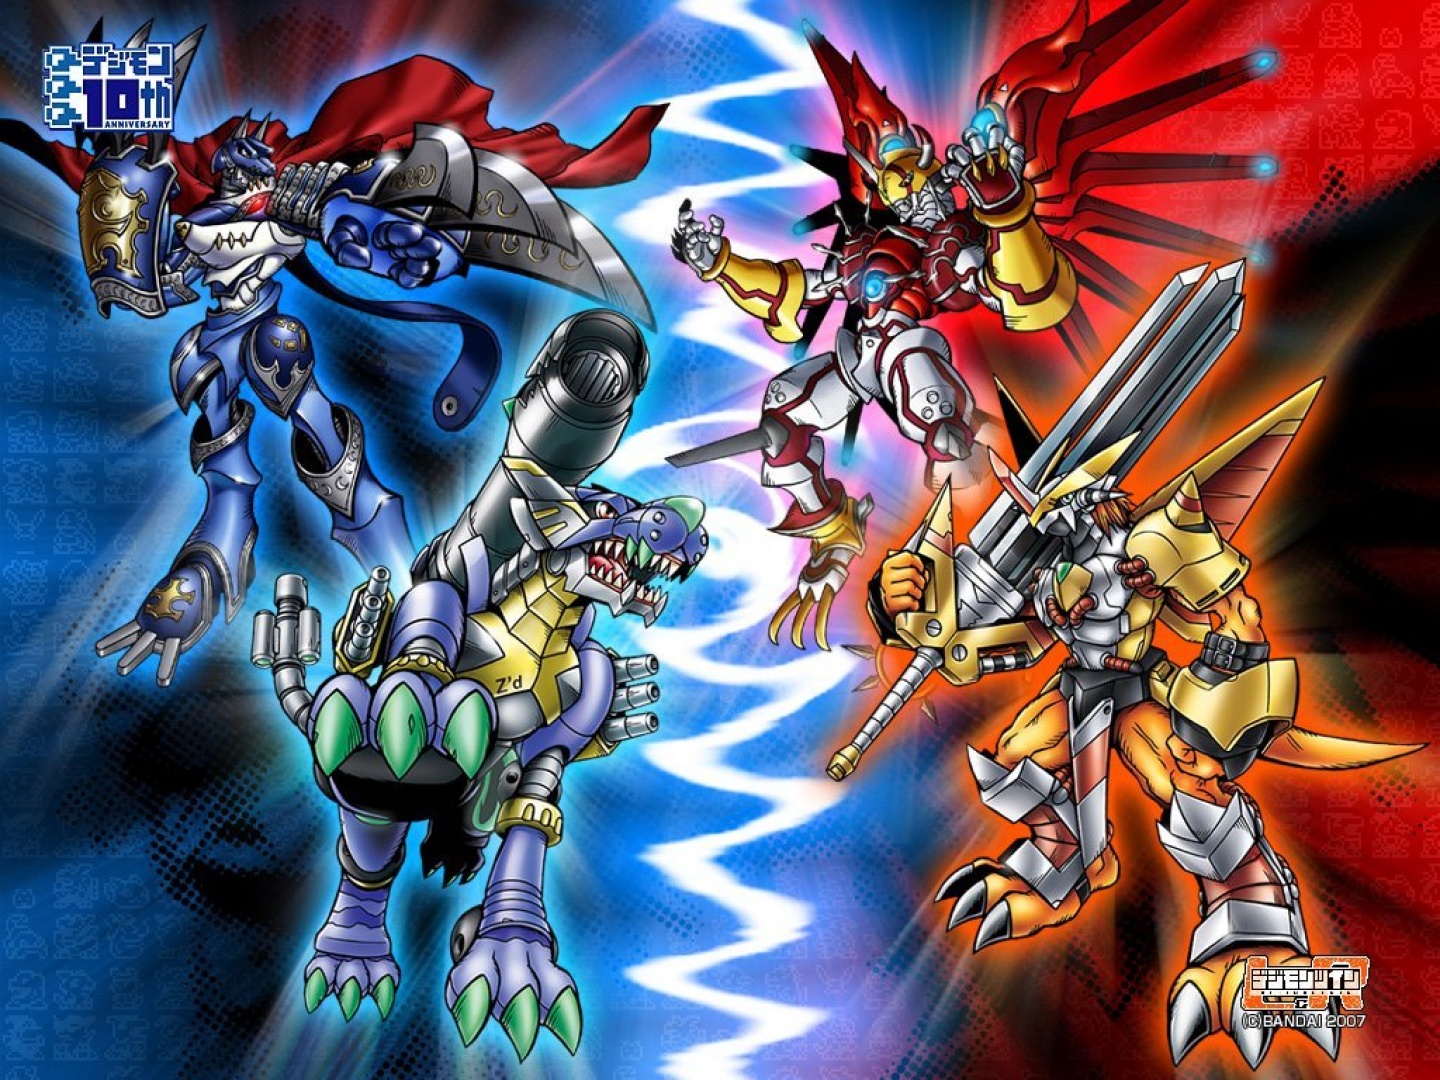 All You Guys Asked Us For More Digimon Wallpaper So Here Have